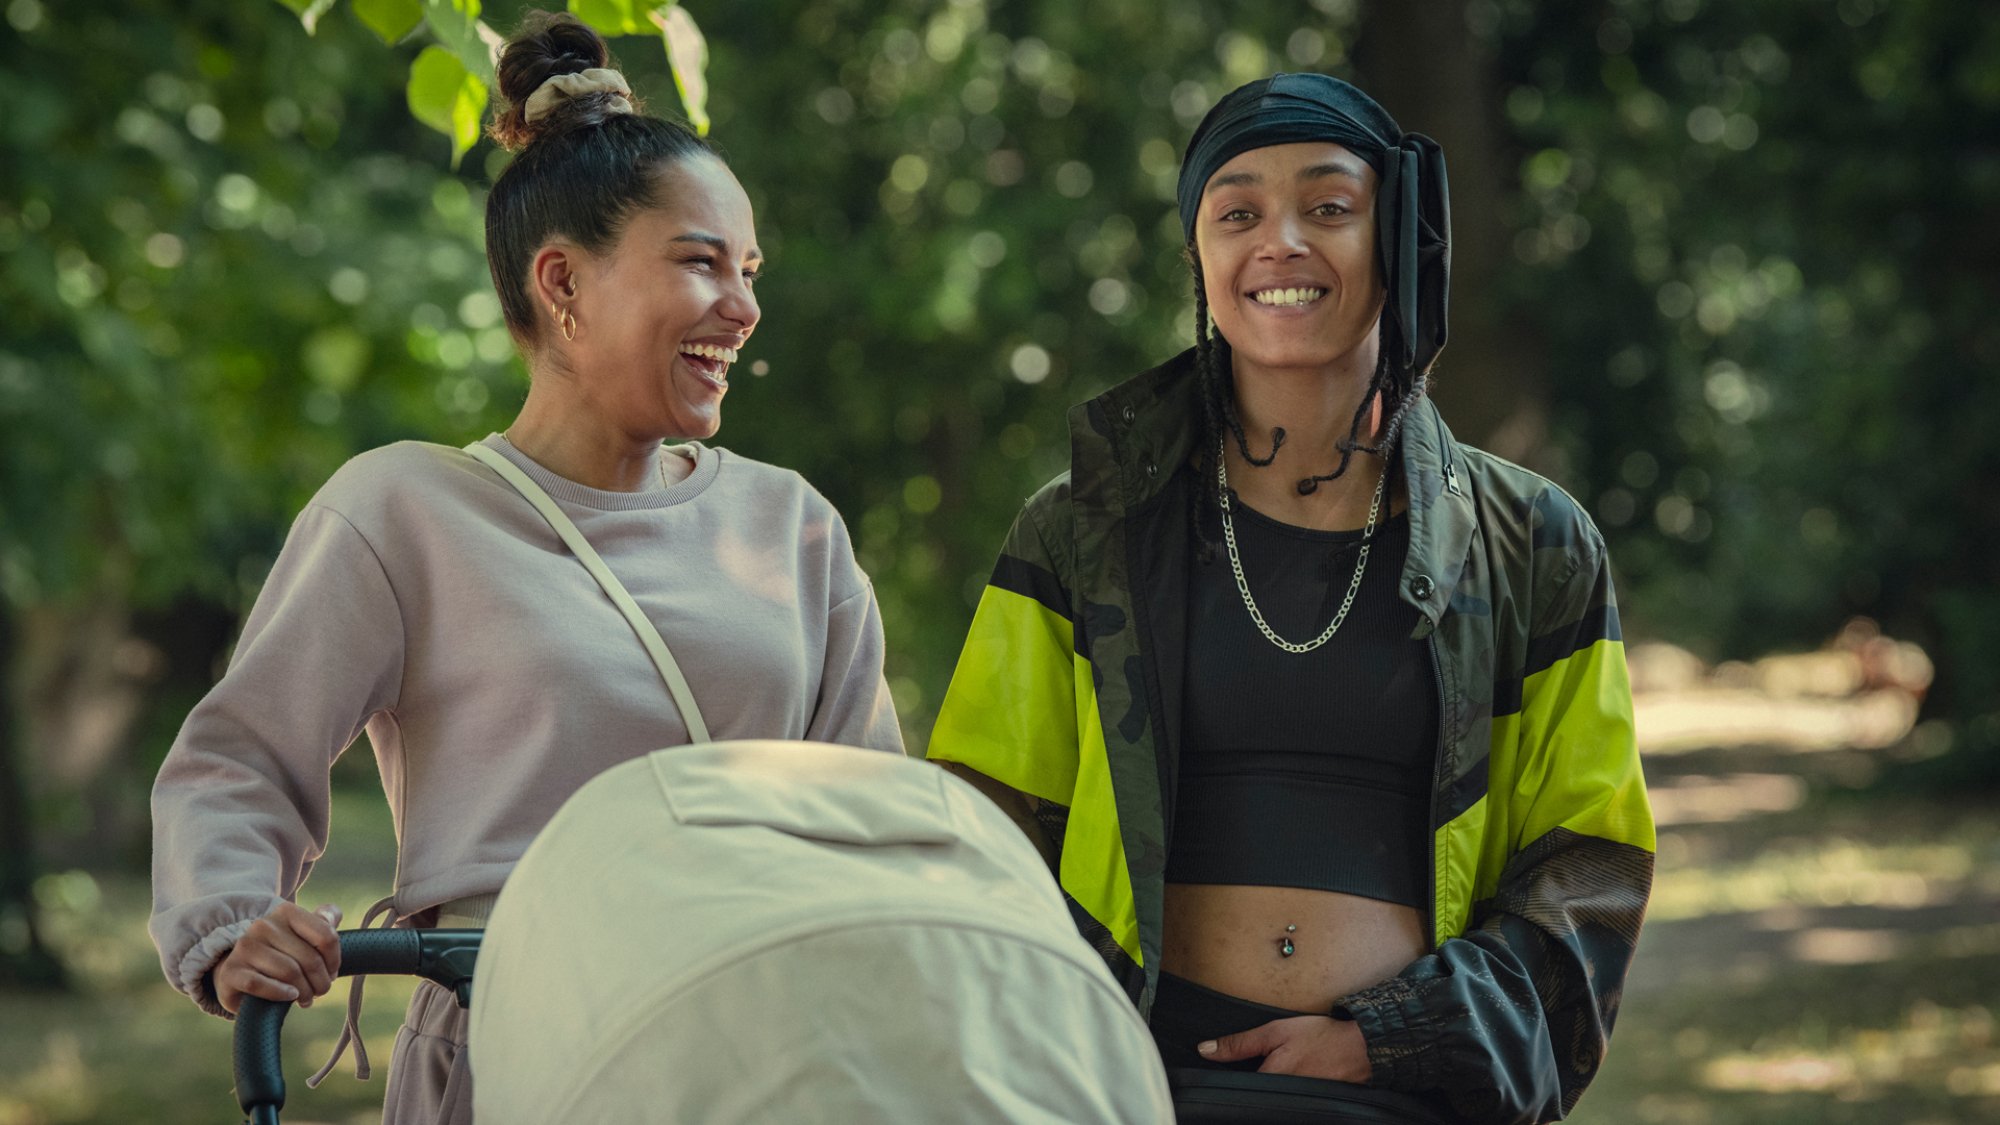 Saffron Hocking and Jasmine Jobson walk through a park with a stroller, laughing, in the TV show "Top Boy"